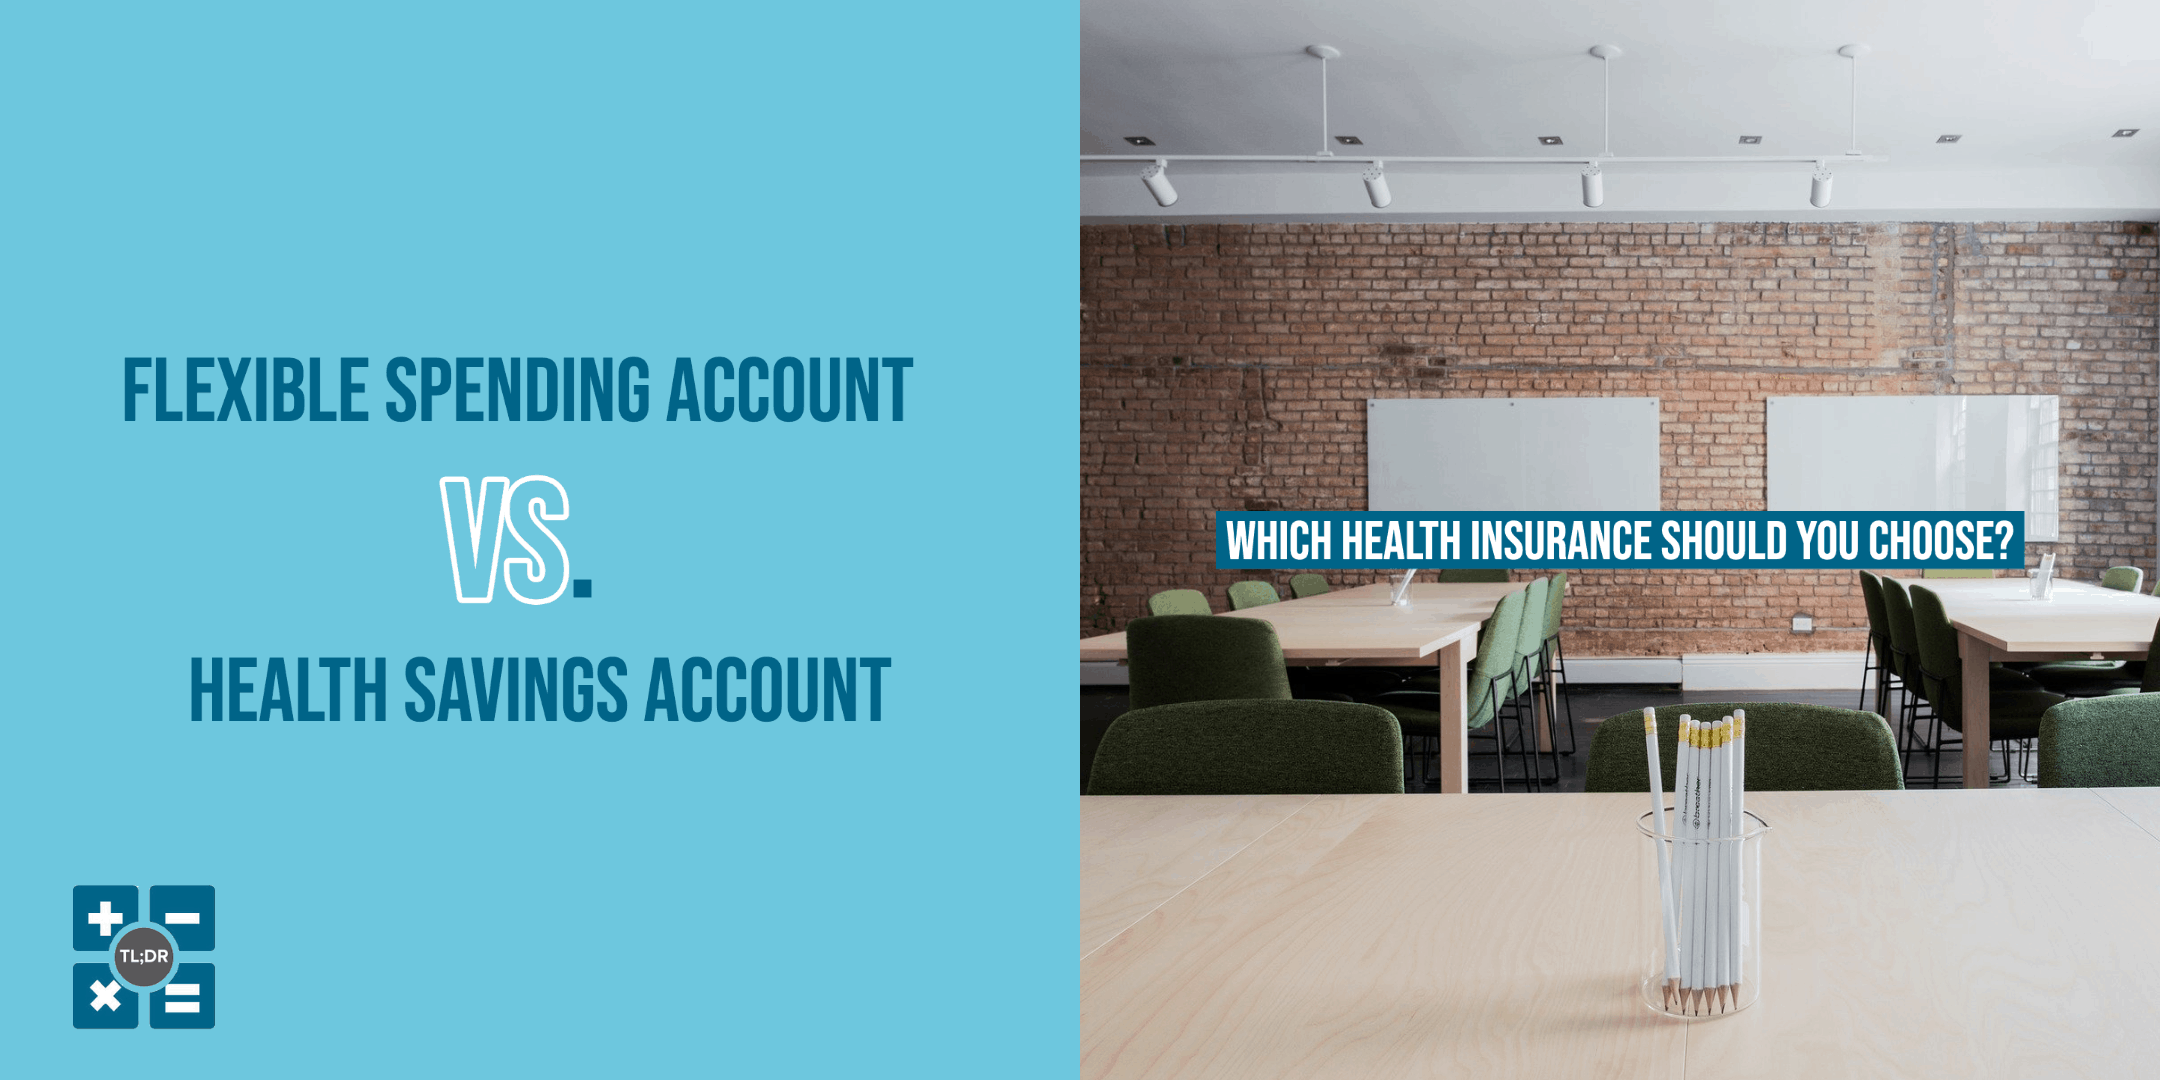 HSA and FSA Accounts: What You Need to Know